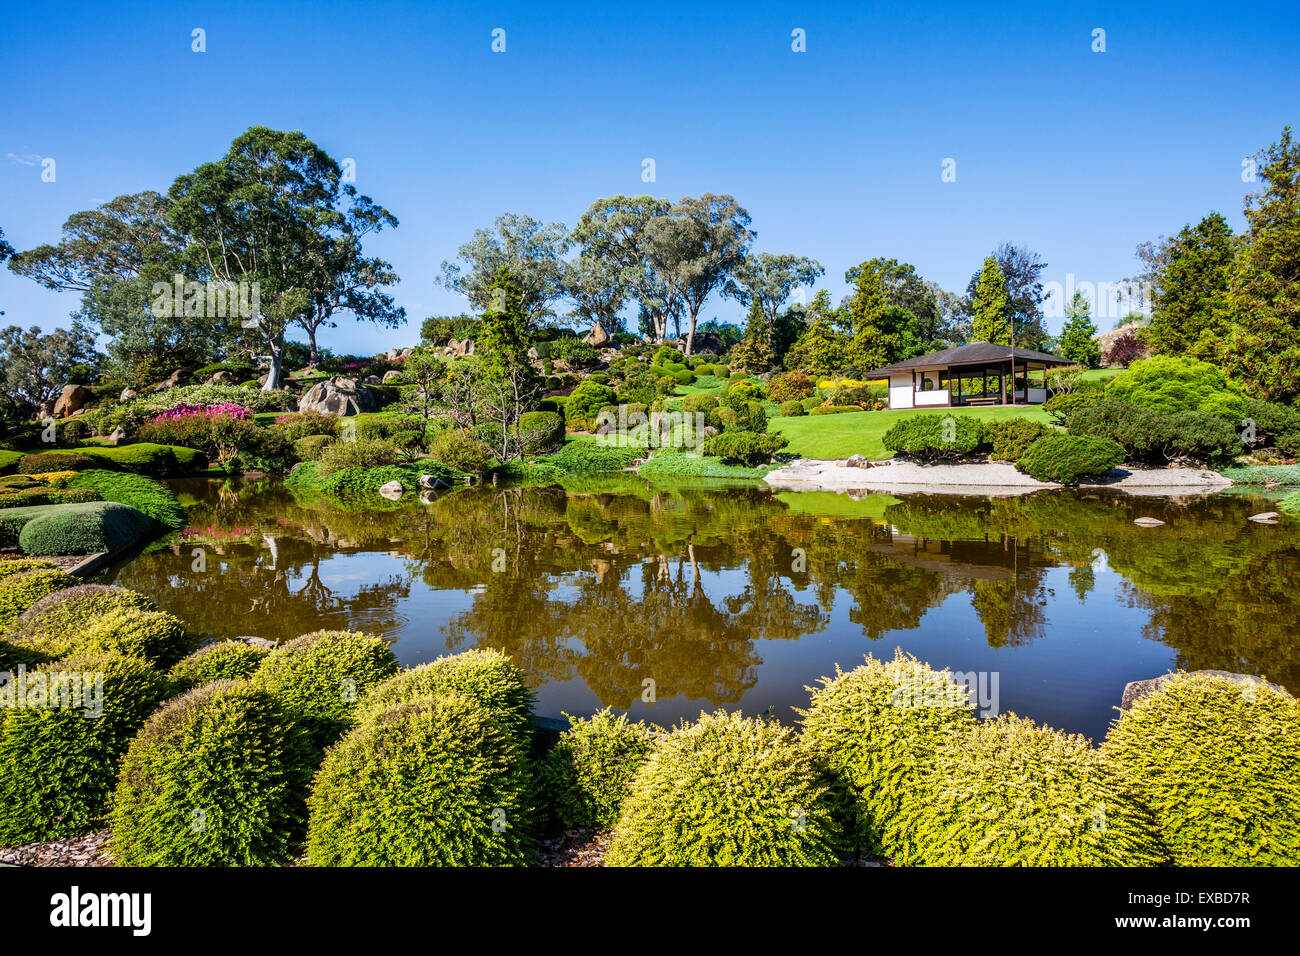 Australia, New South Wales, Central West Region, lake and tea house at the Cowra Japanese Garden Stock Photo